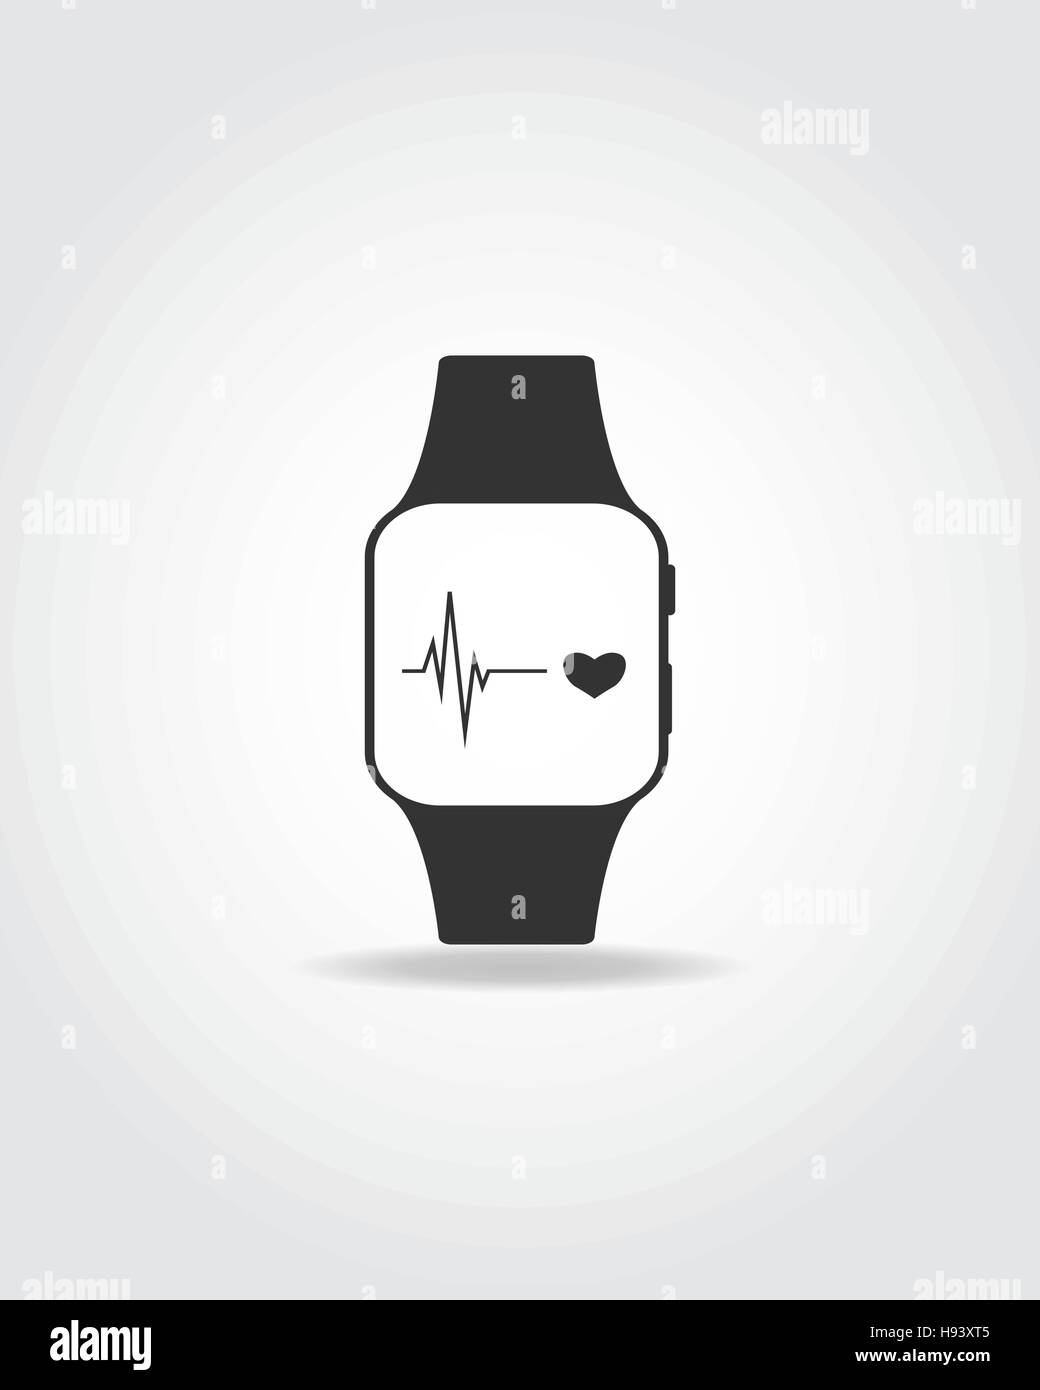 Black icon of sport smart watch. Heart icon and digram. Stock Vector